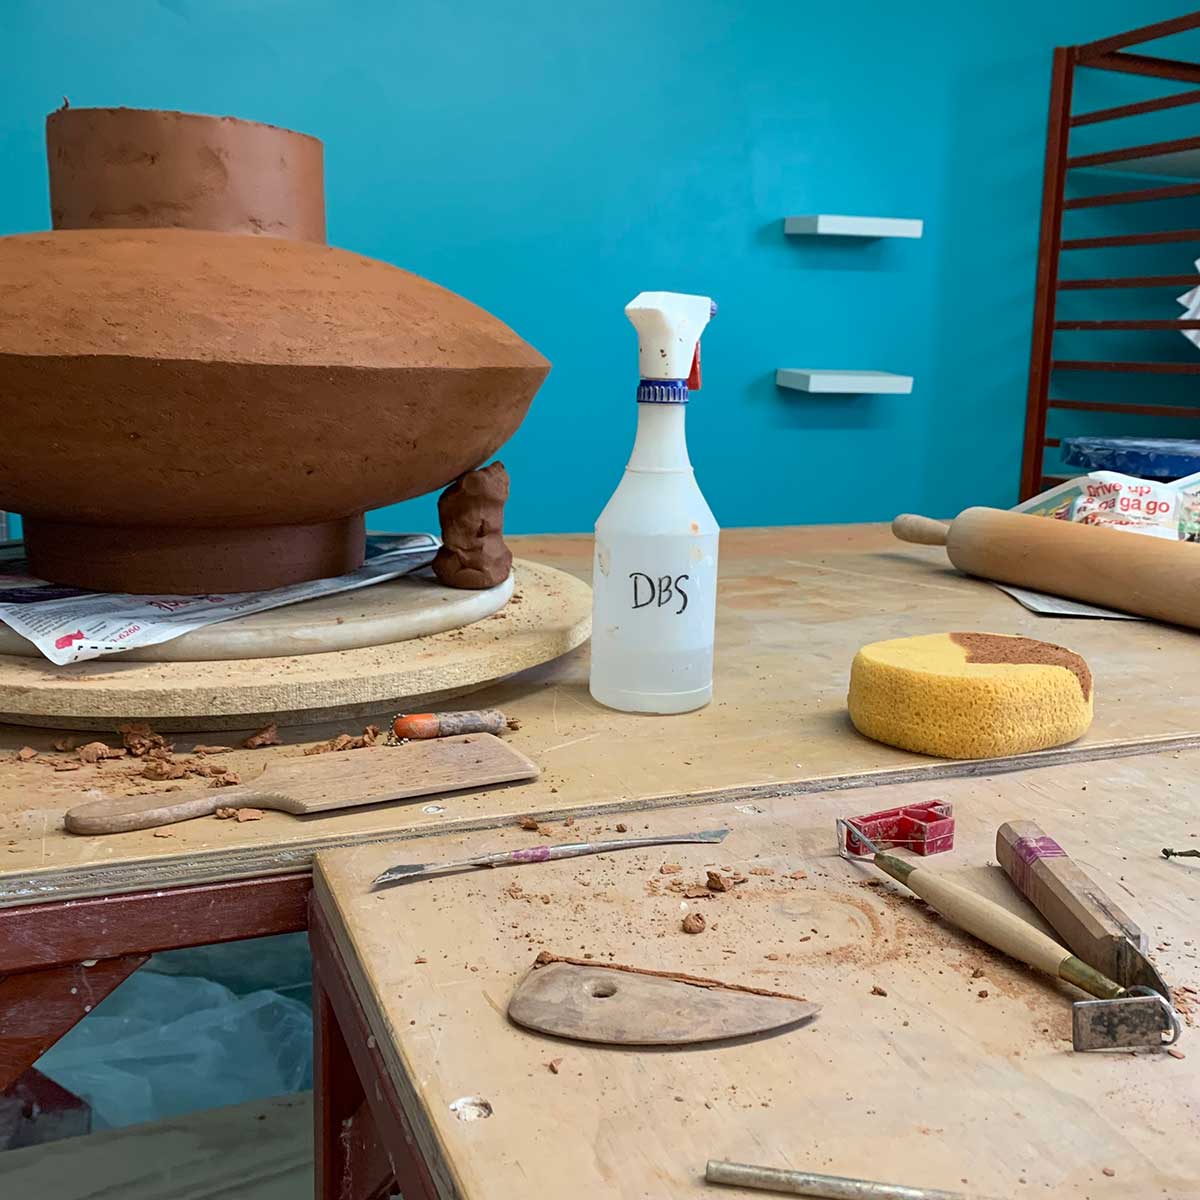 Clay pot in the making in a studio with tools